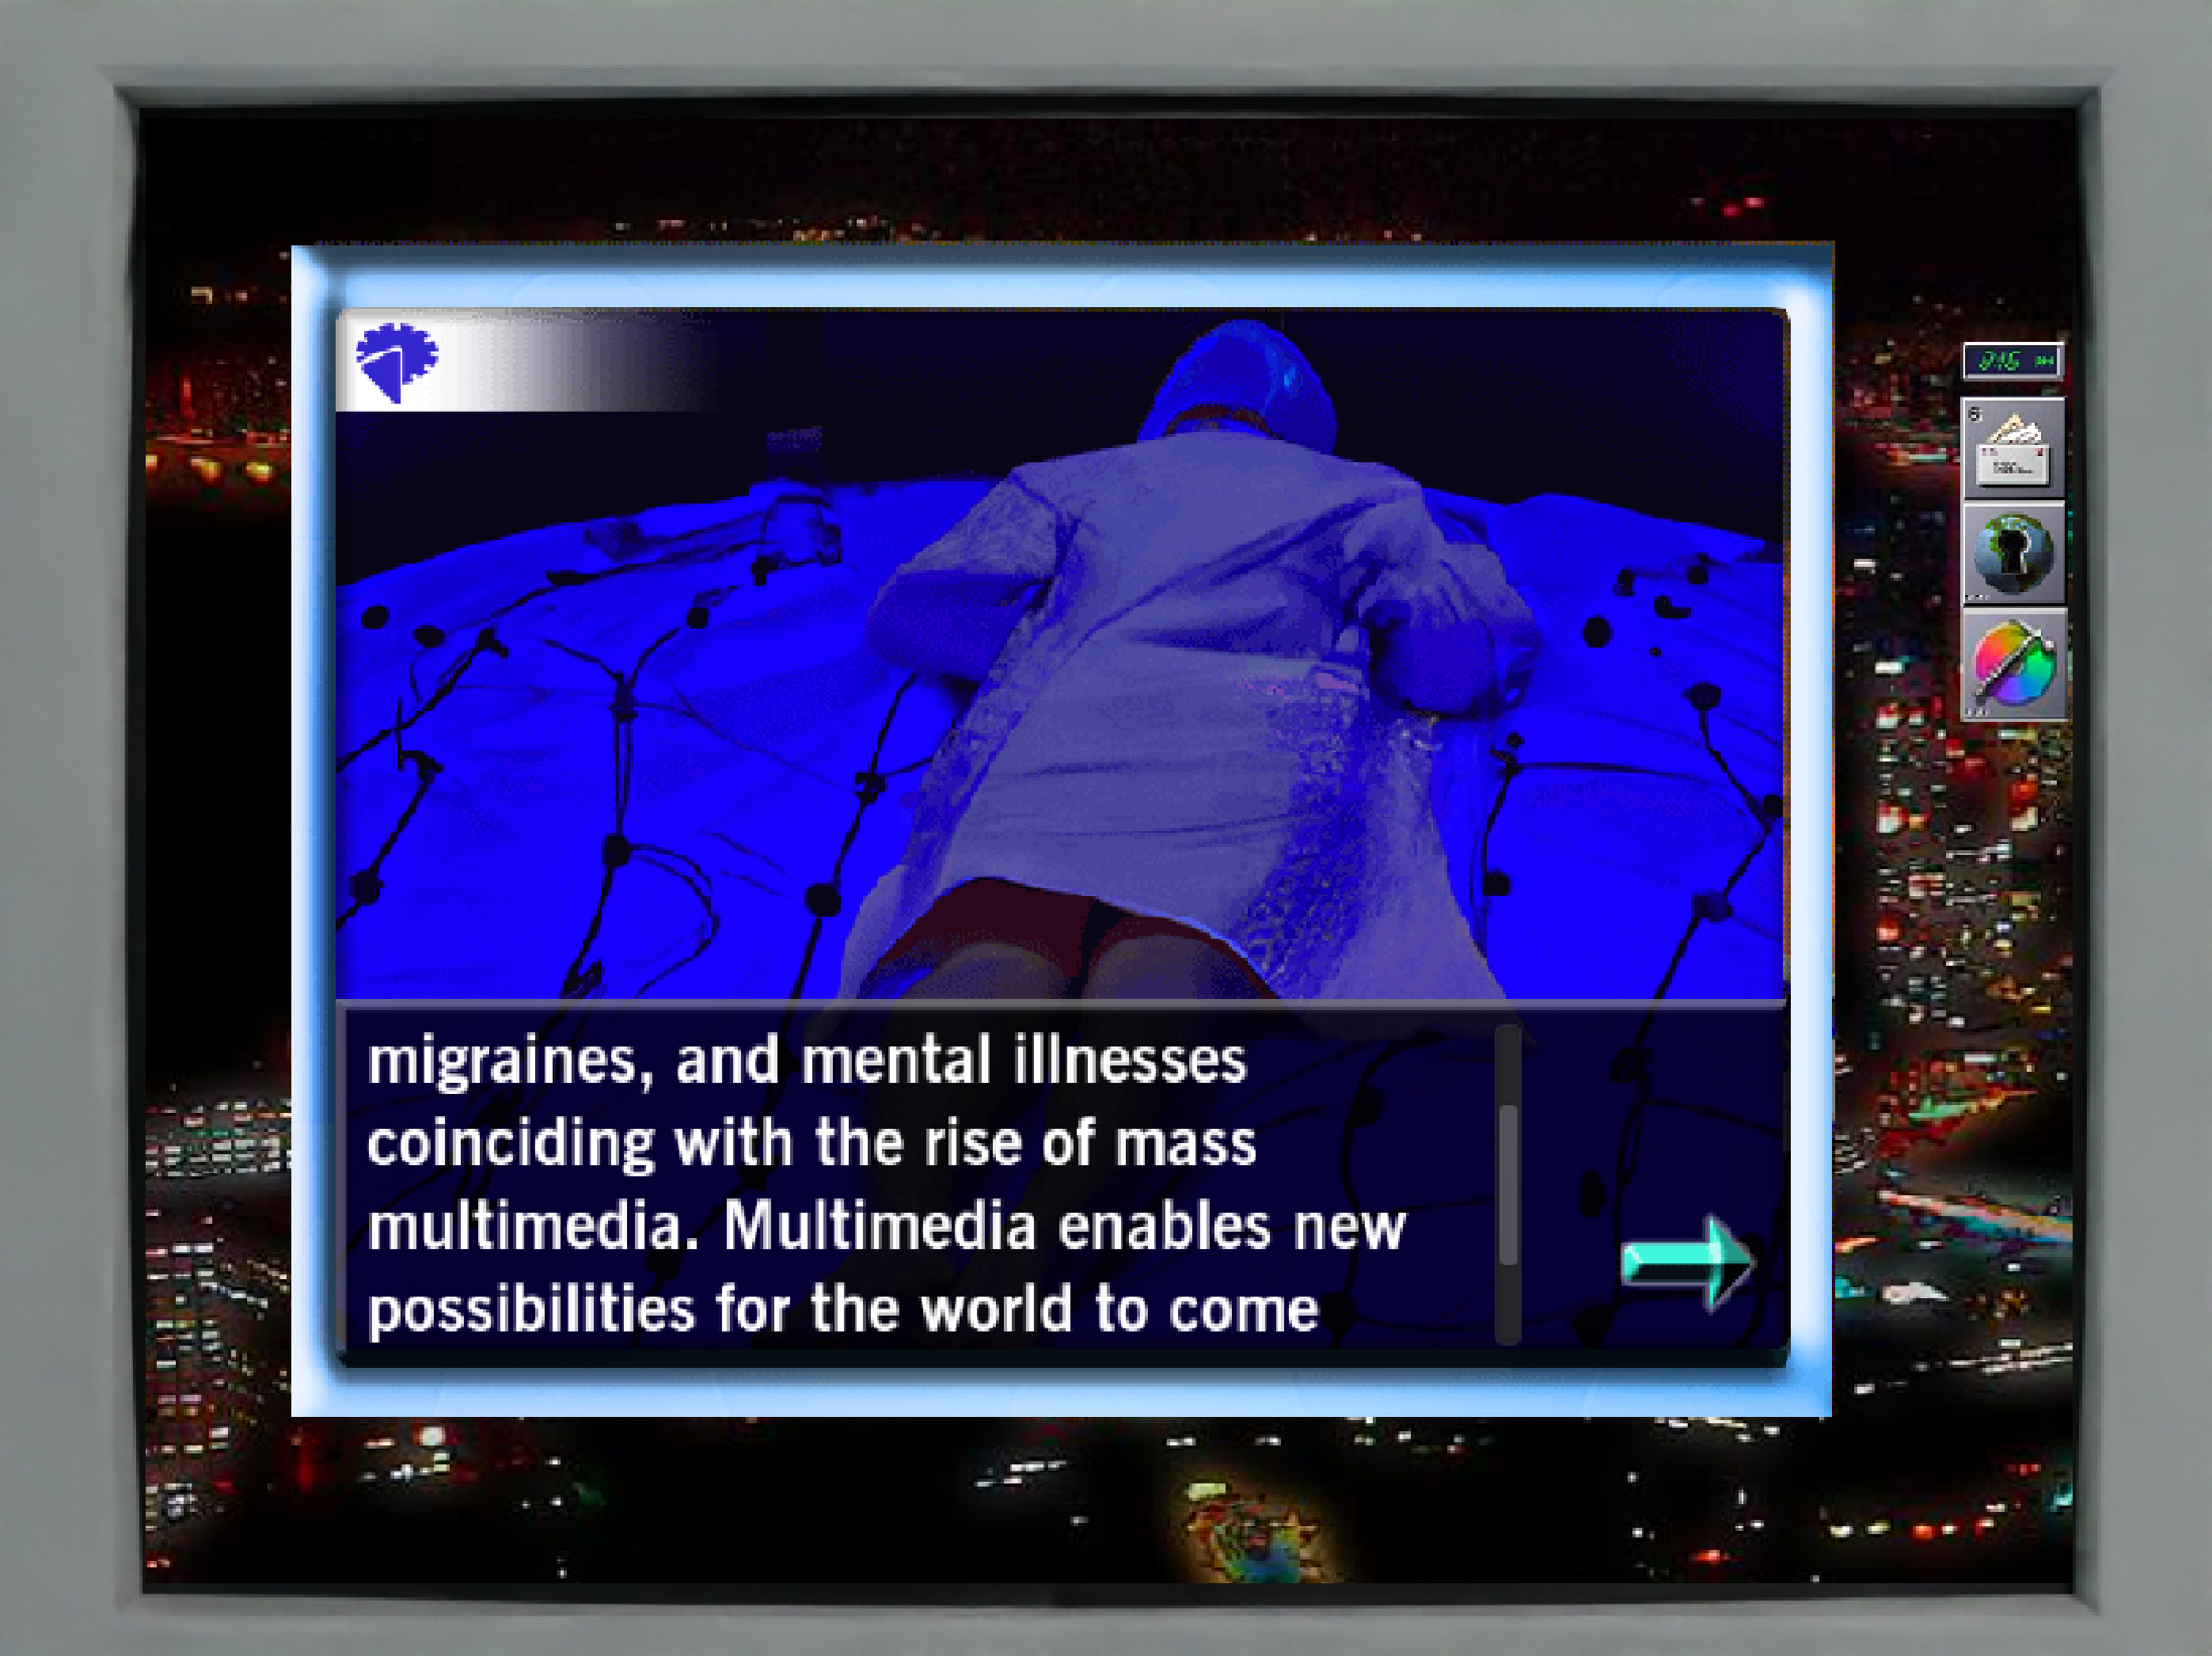 A computer screen in the game has text that says: "migraines, and mental illnesses coinciding with the rise of mass multimedia. Multimedia enables new possibilities for the world to come." 